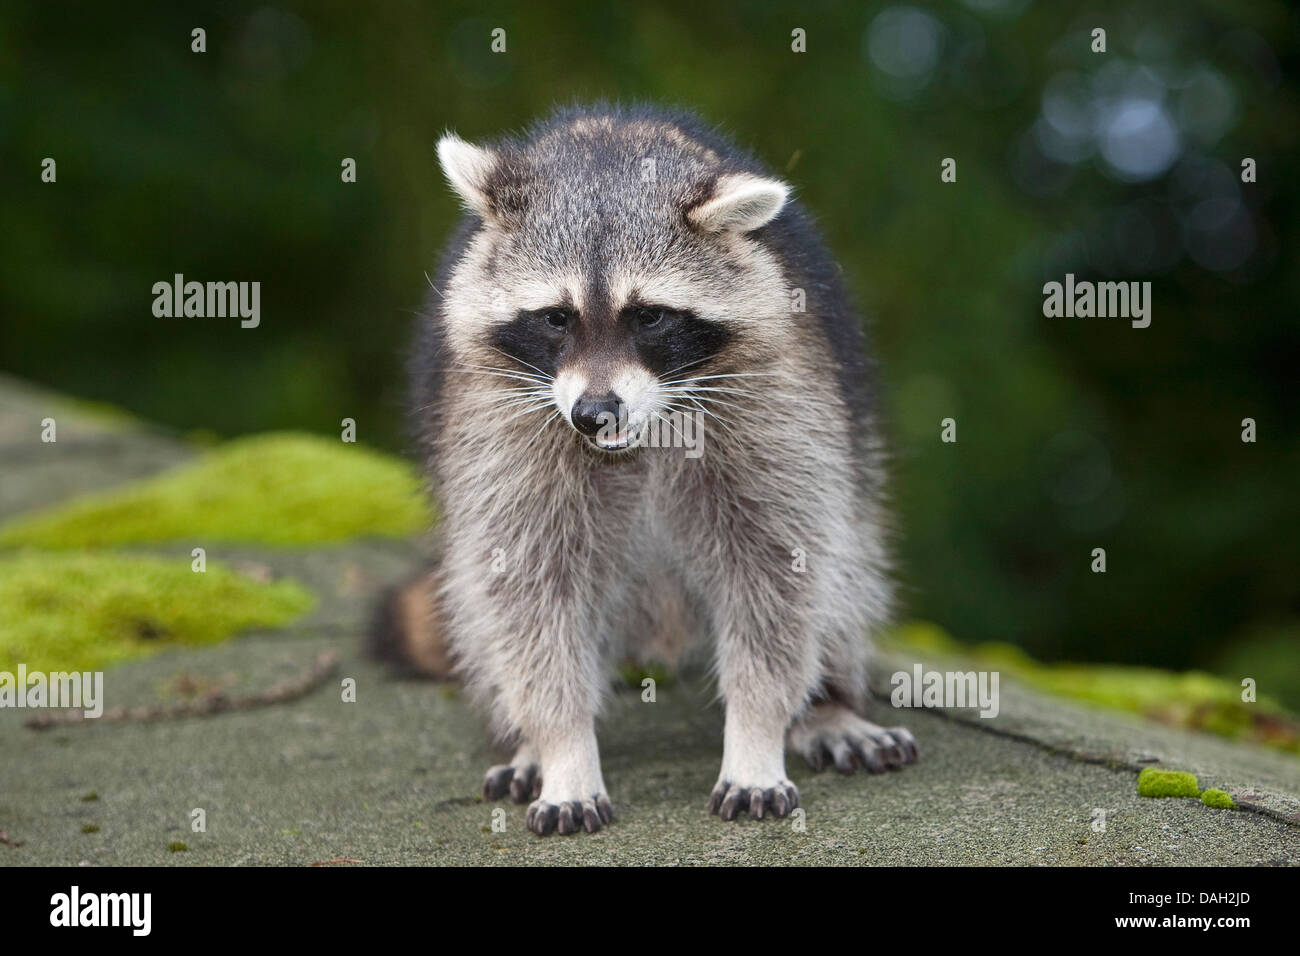 common raccoon (Procyon lotor), 5 months old male sitting on a roof, Germany Stock Photo